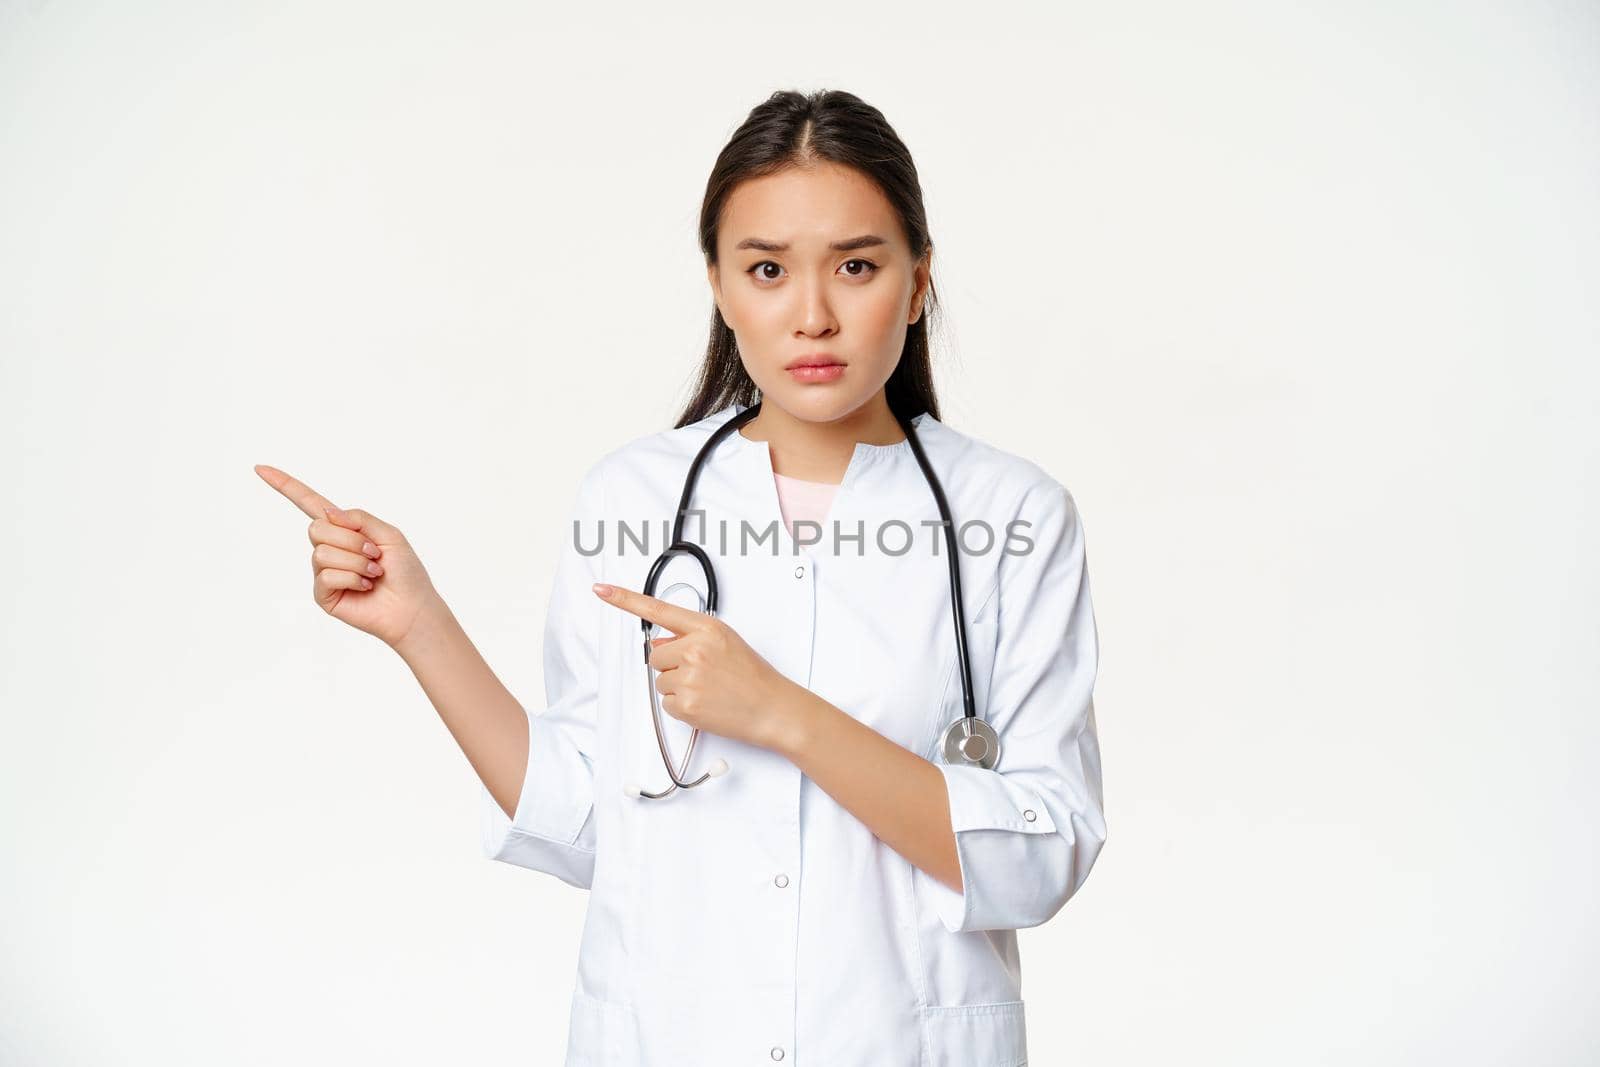 Sad and concerned female doctor, pointing fingers left, showing smth important, promo information, standing over white background.